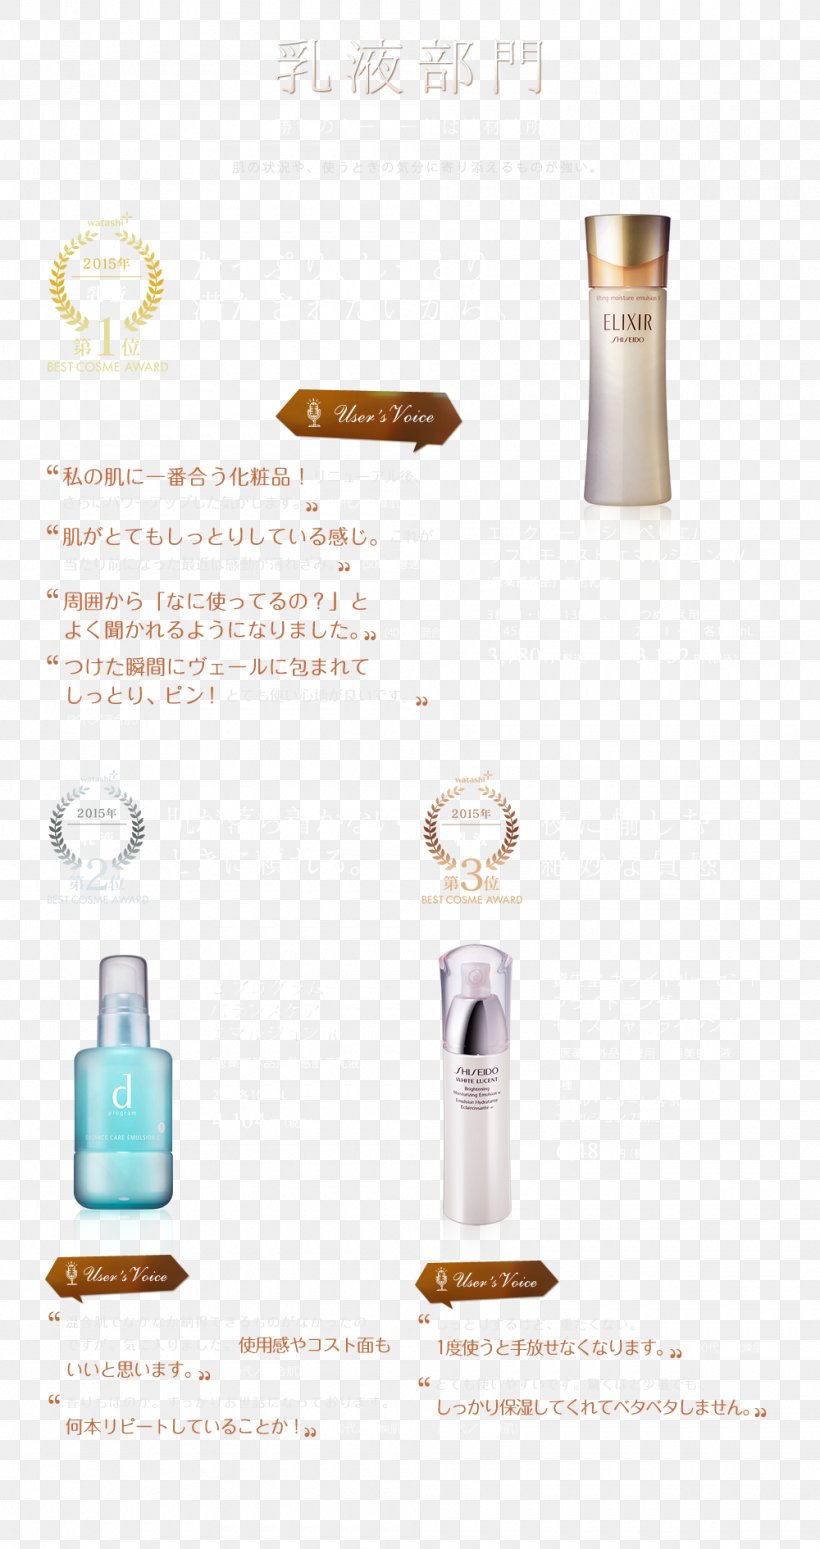 Perfume Glass Bottle Product Design, PNG, 1000x1890px, Perfume, Bottle, Cosmetics, Glass, Glass Bottle Download Free